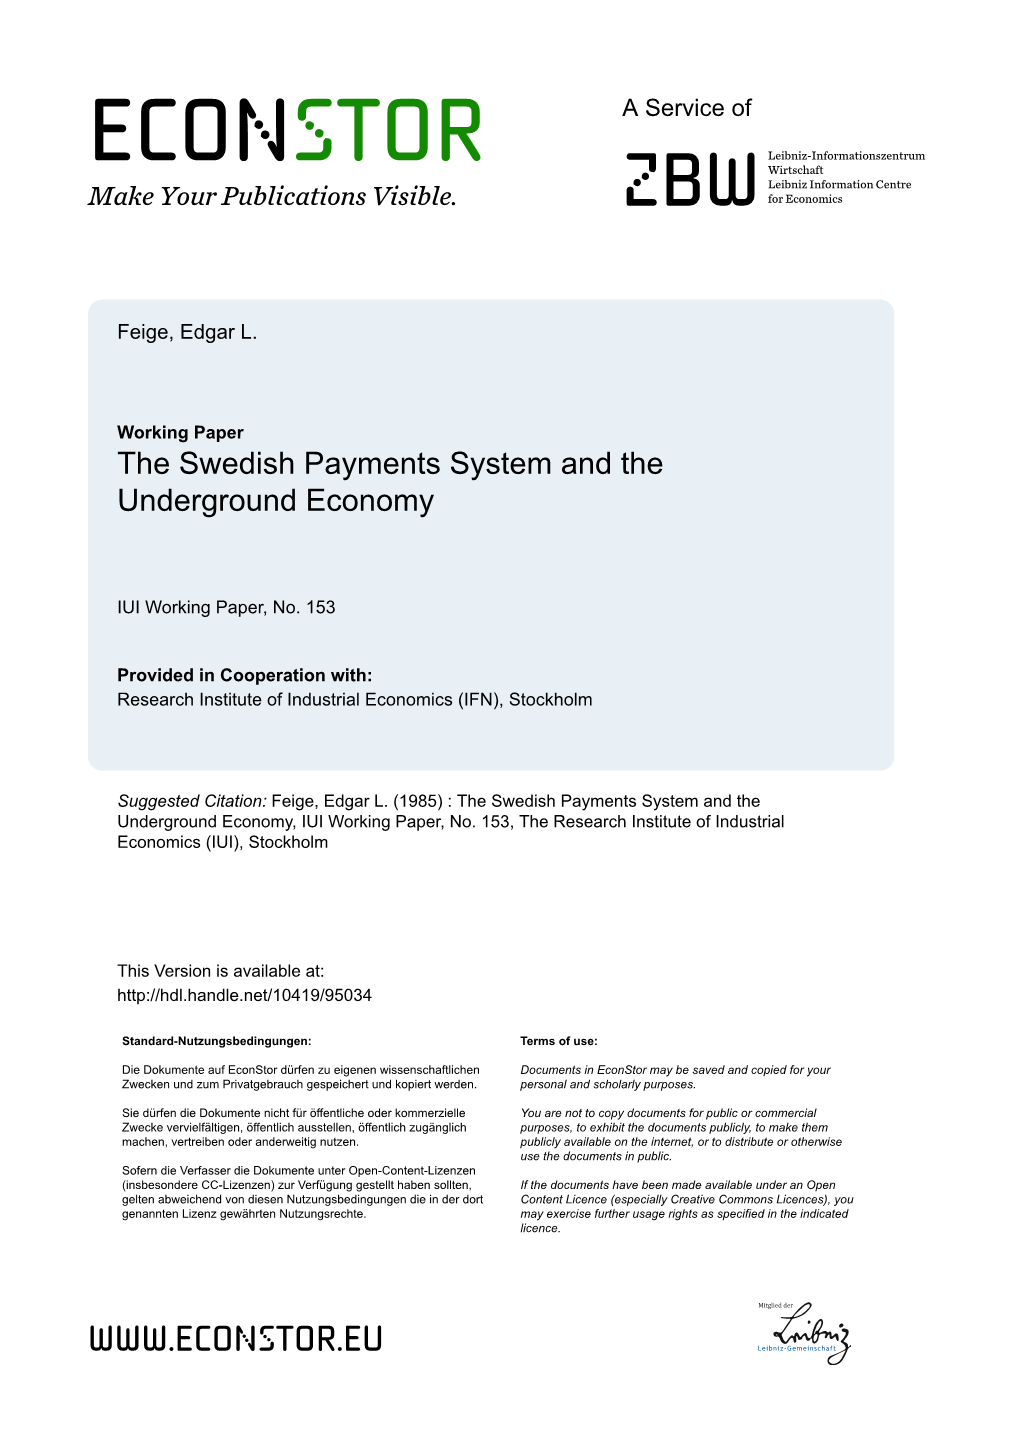 The Swedish Payments System and the Underground Economy